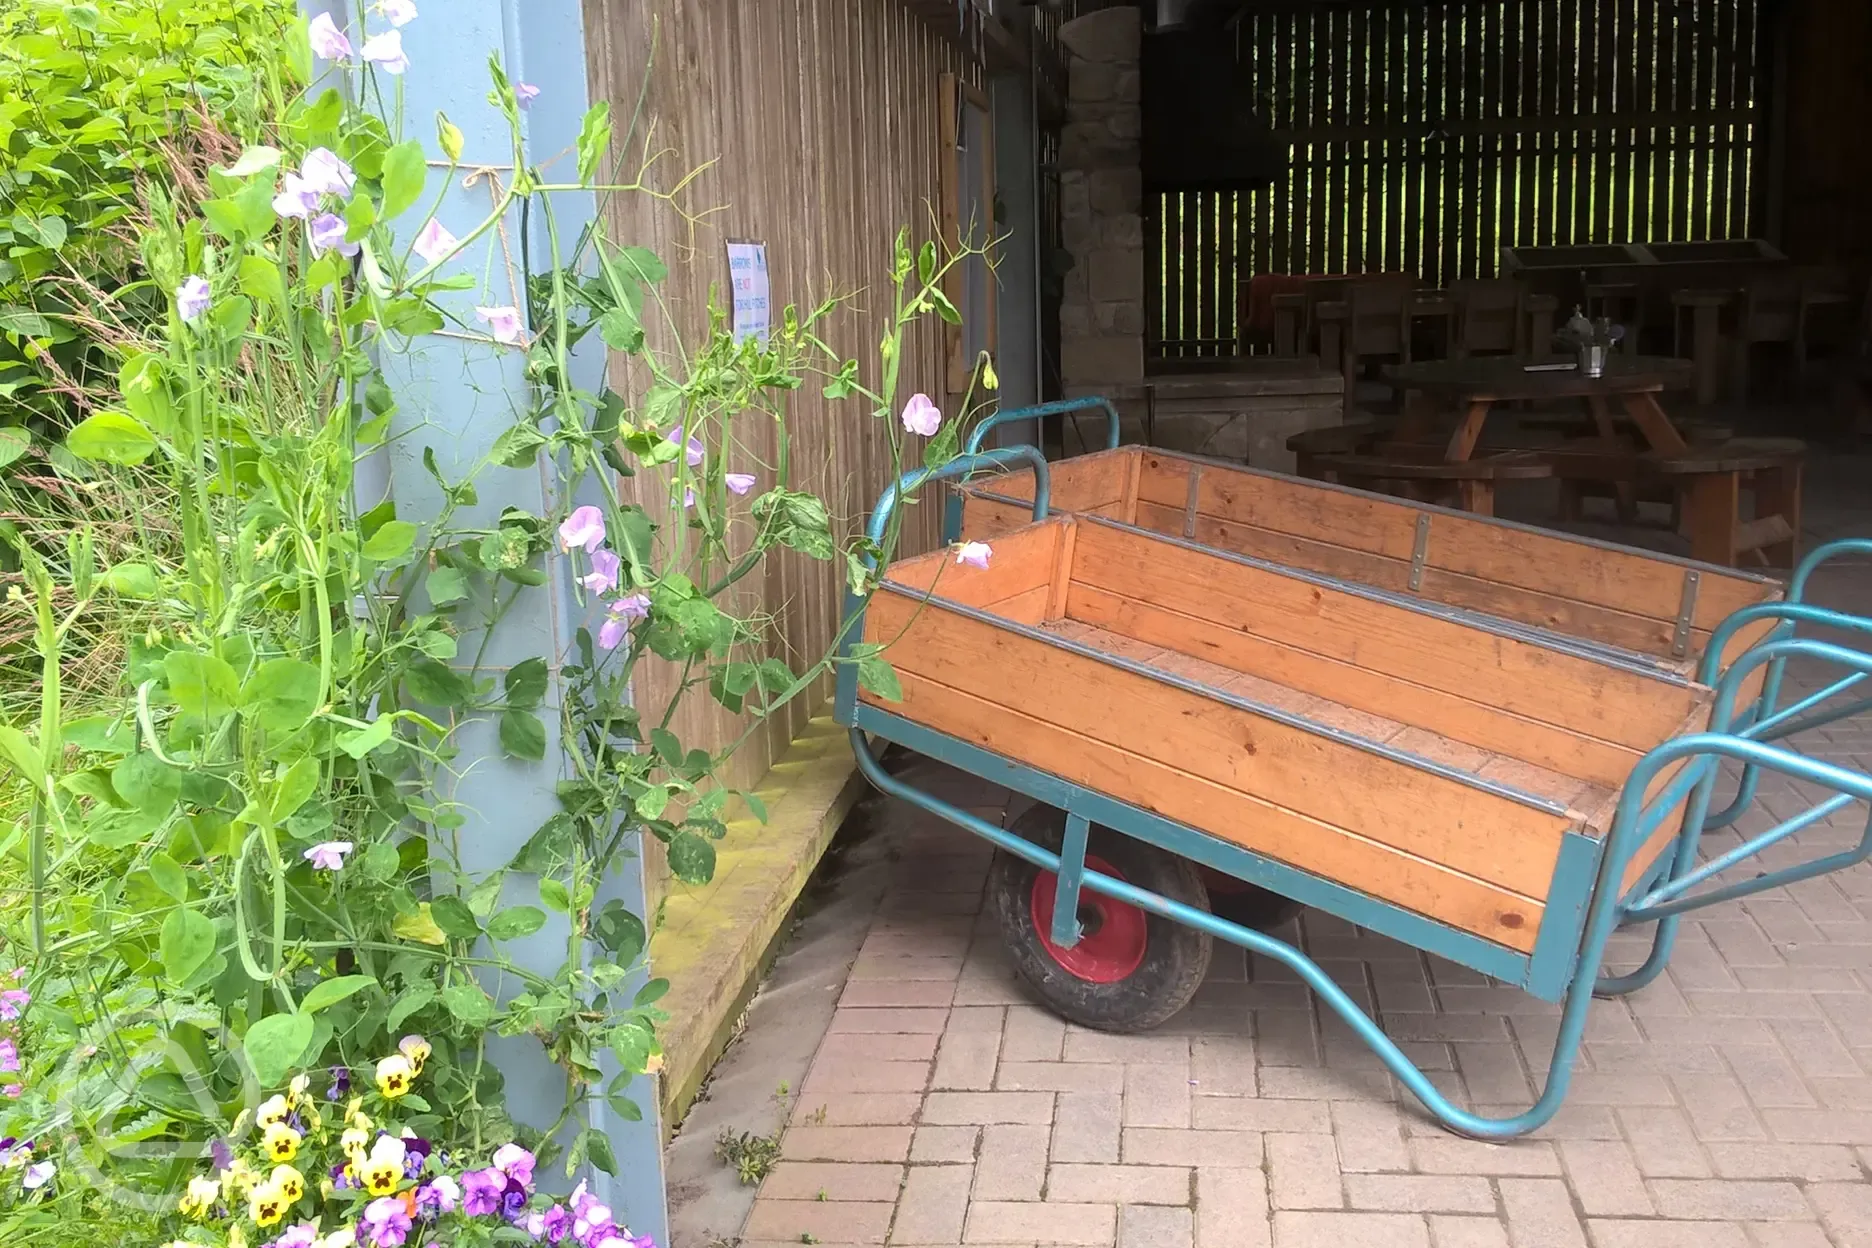 Garden barrows to get everything to your garden pitch